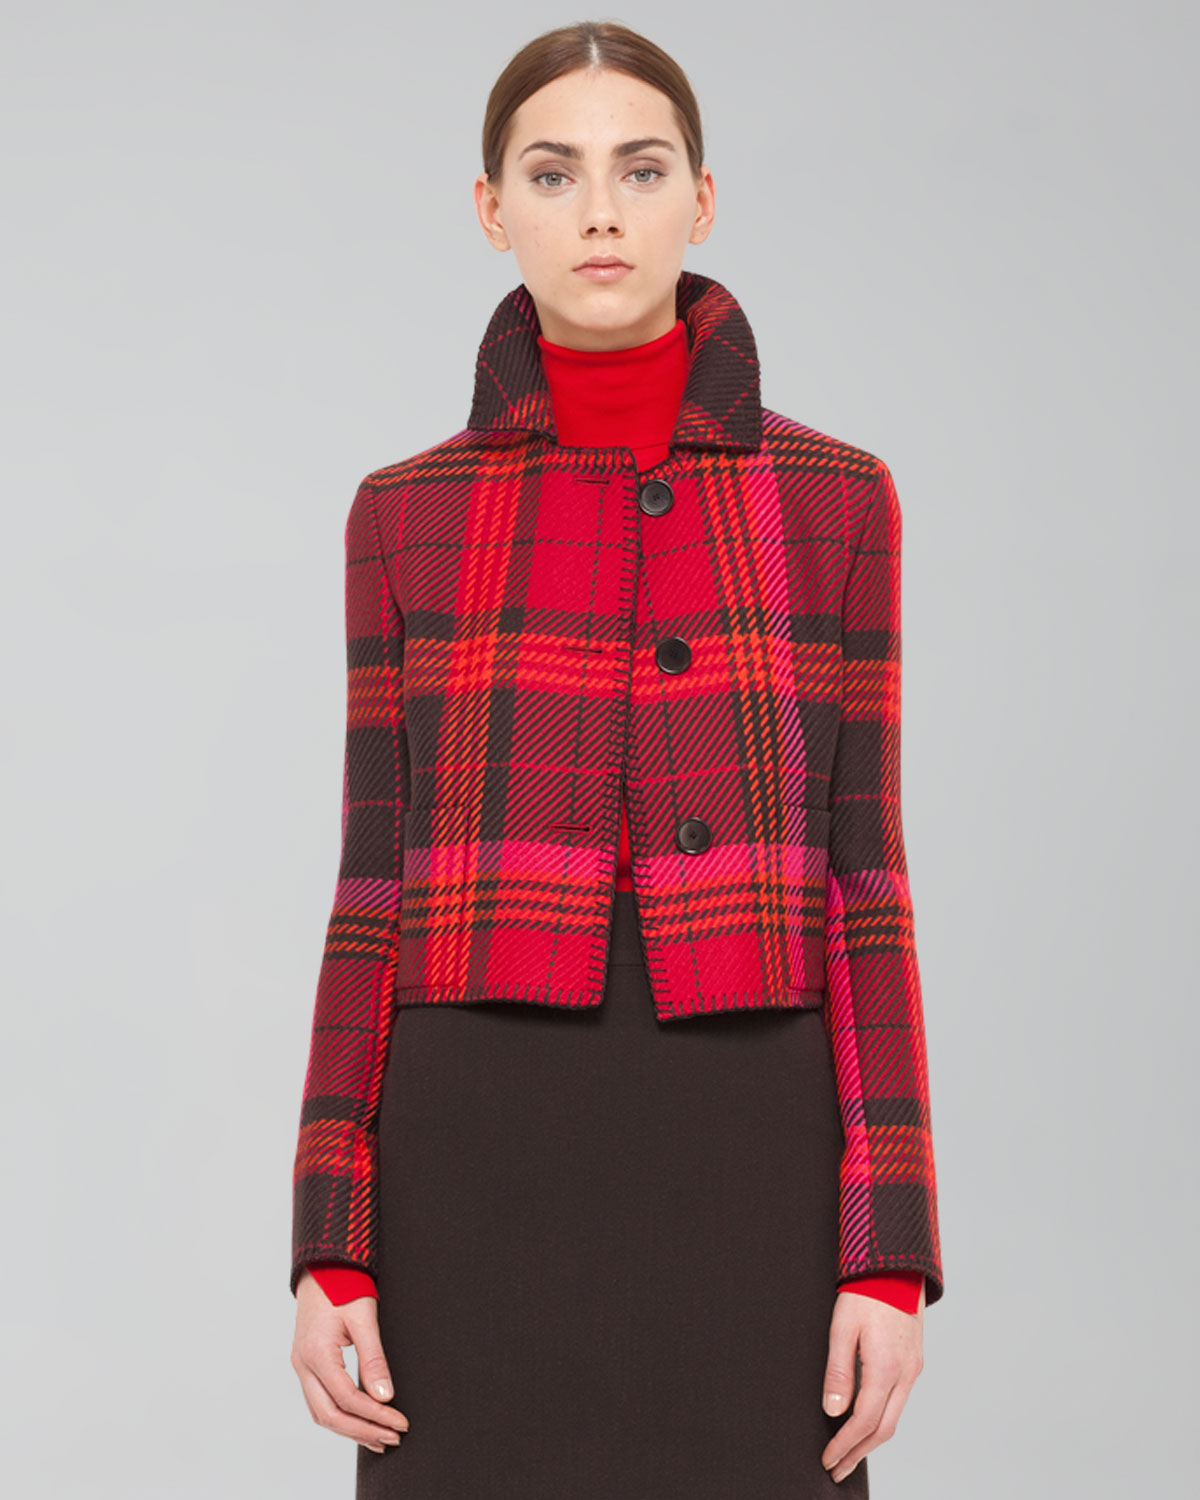 Lyst - Akris Punto Cropped Wool Plaid Jacket in Red